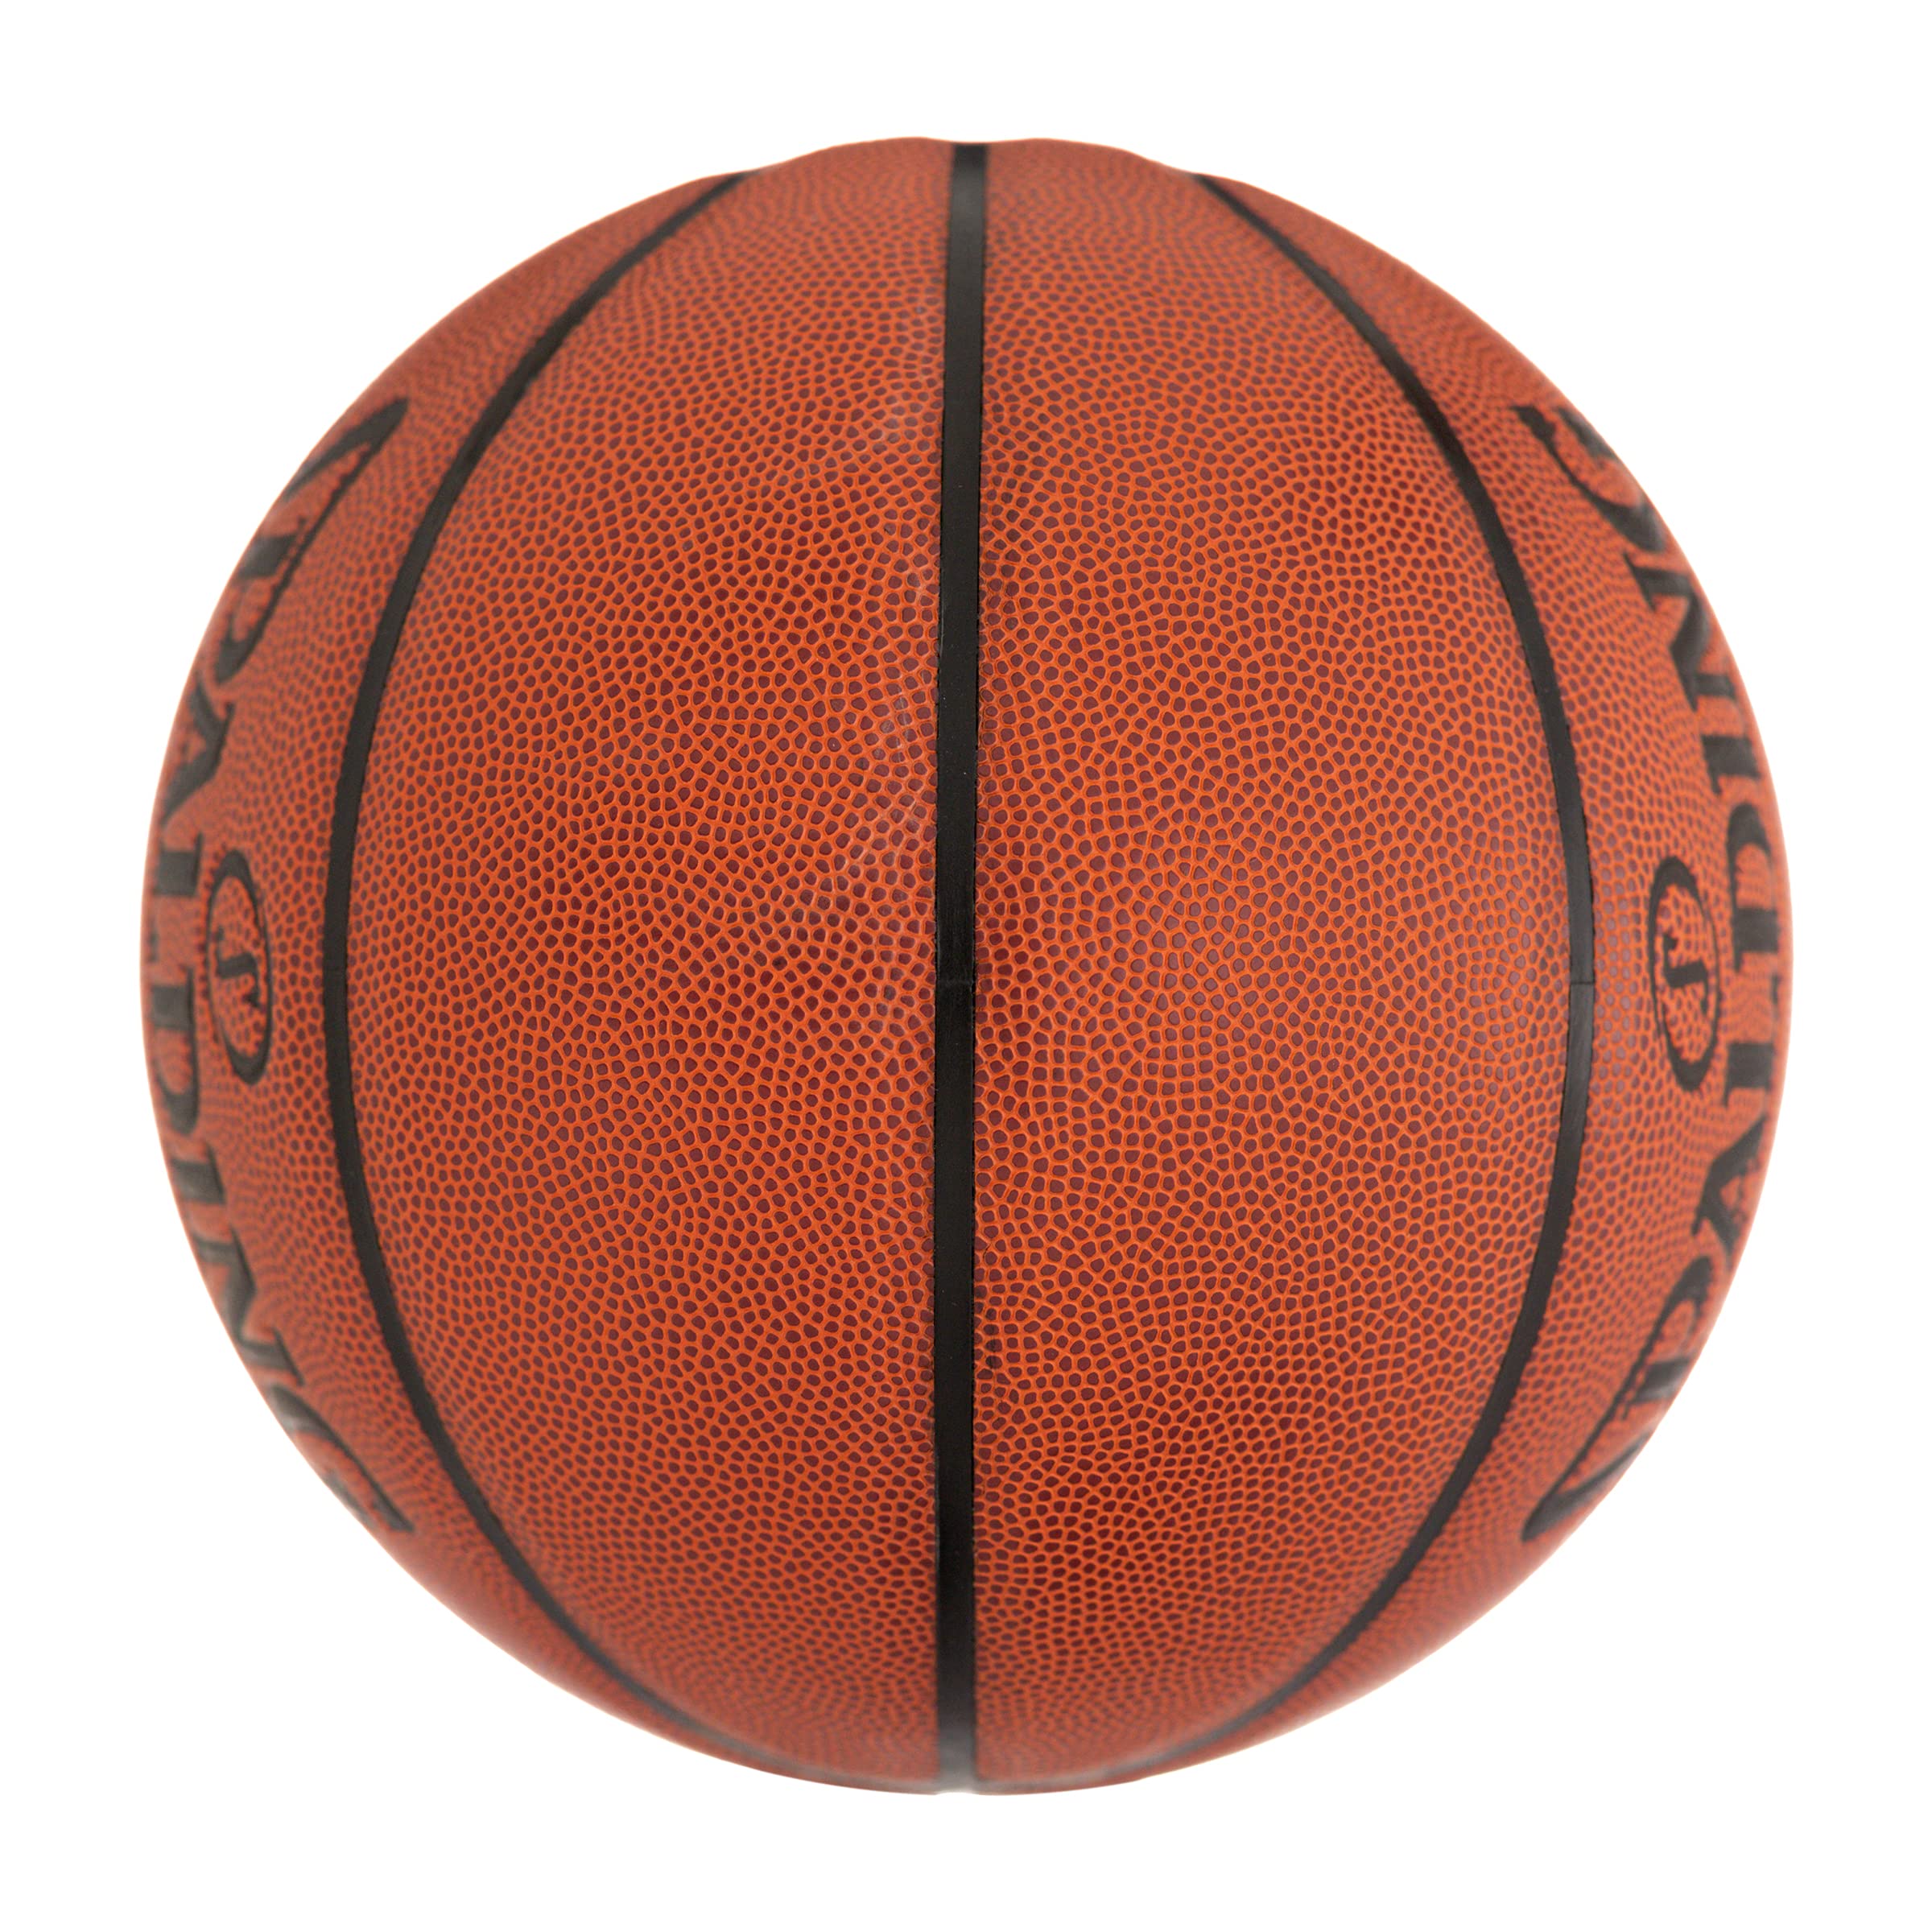 Spalding TF Series Indoor/Outdoor Basketballs, Composite Leather, All Surface Performance - 29.5